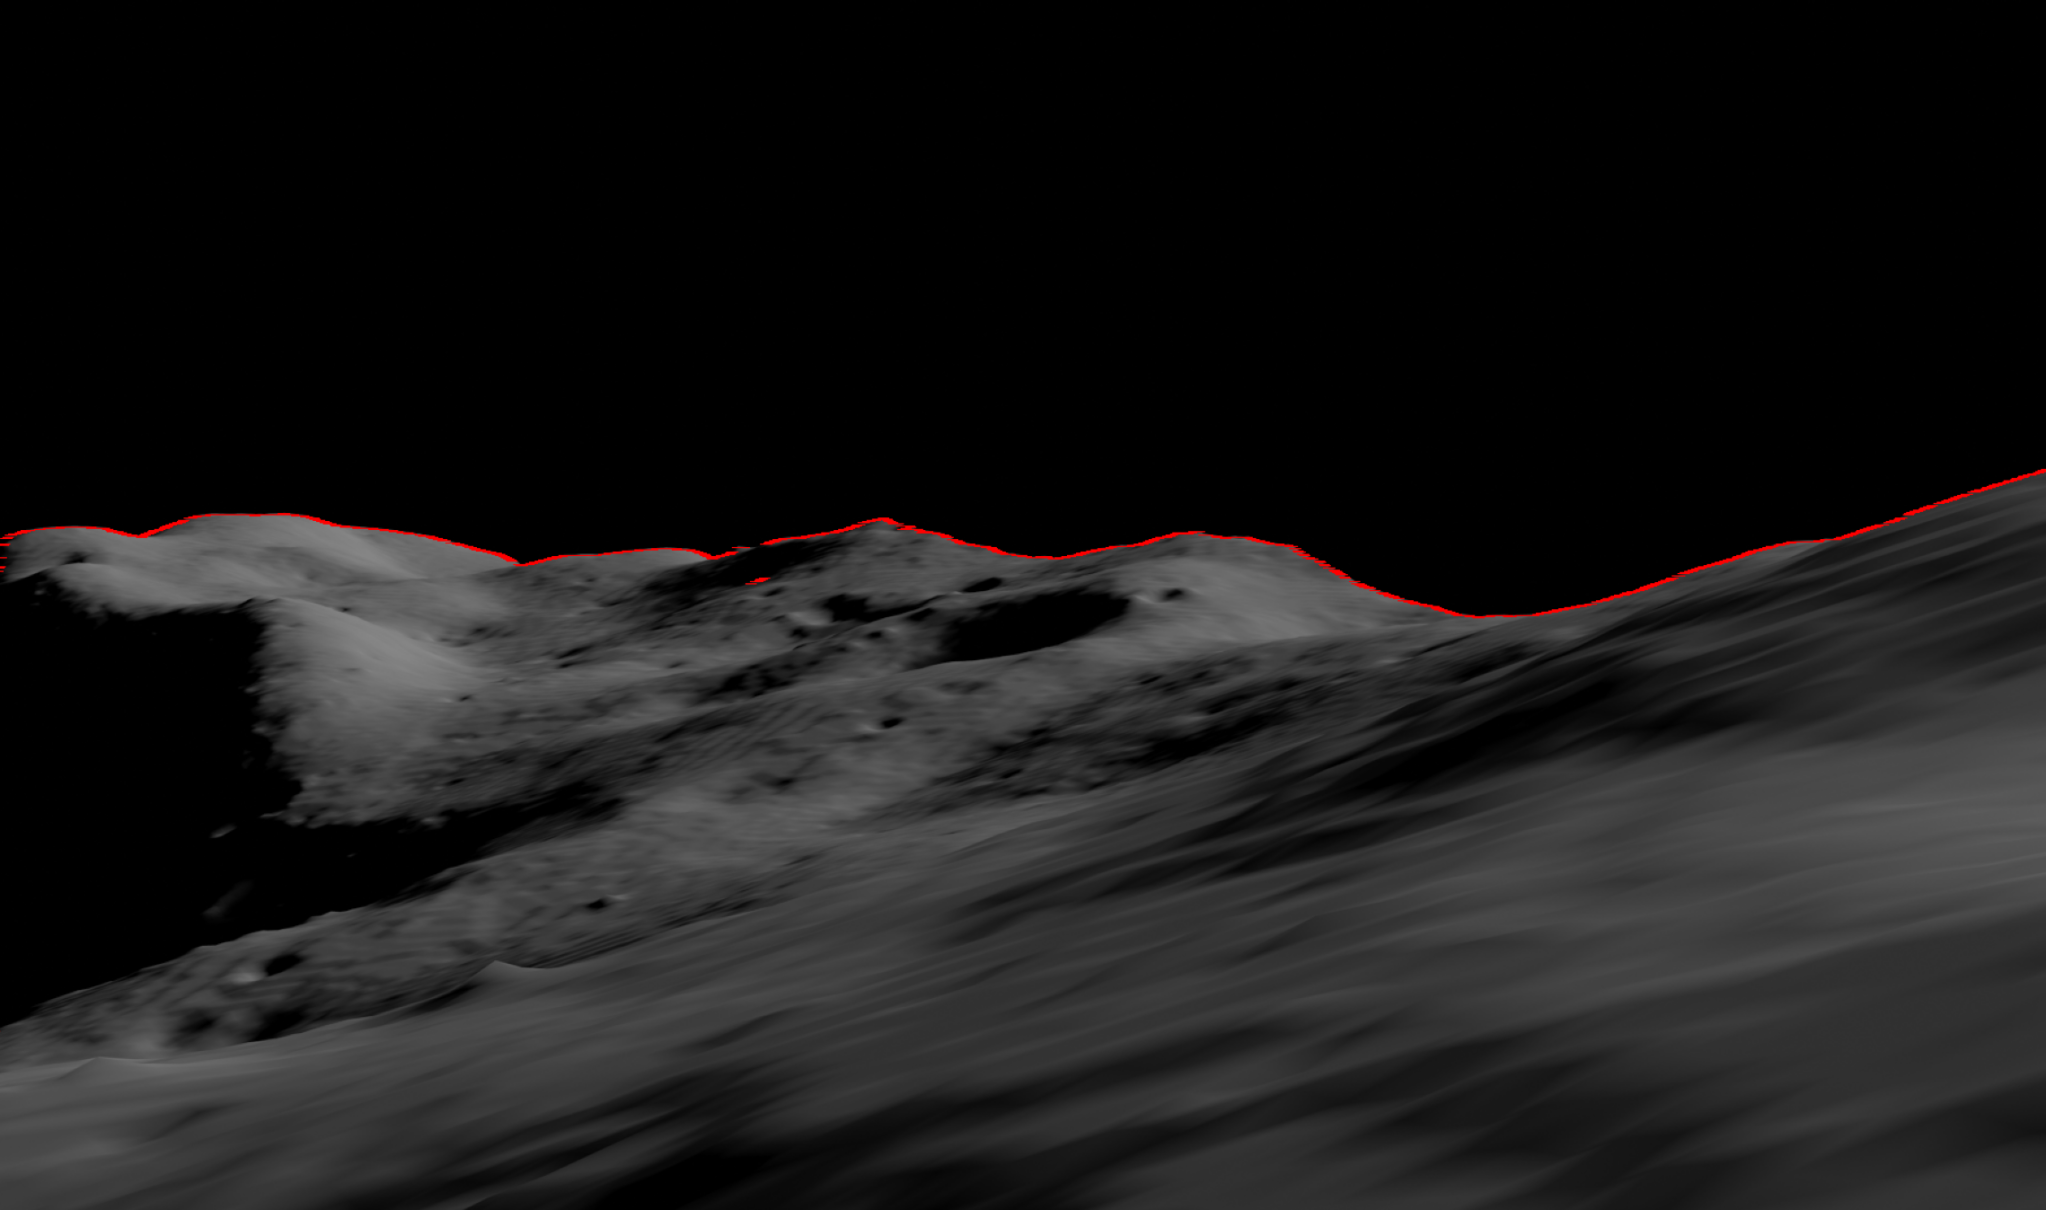 black and grey landscape under a black sky shows dimly-lit craters on the moon. red lines mark the boundary between land and sky